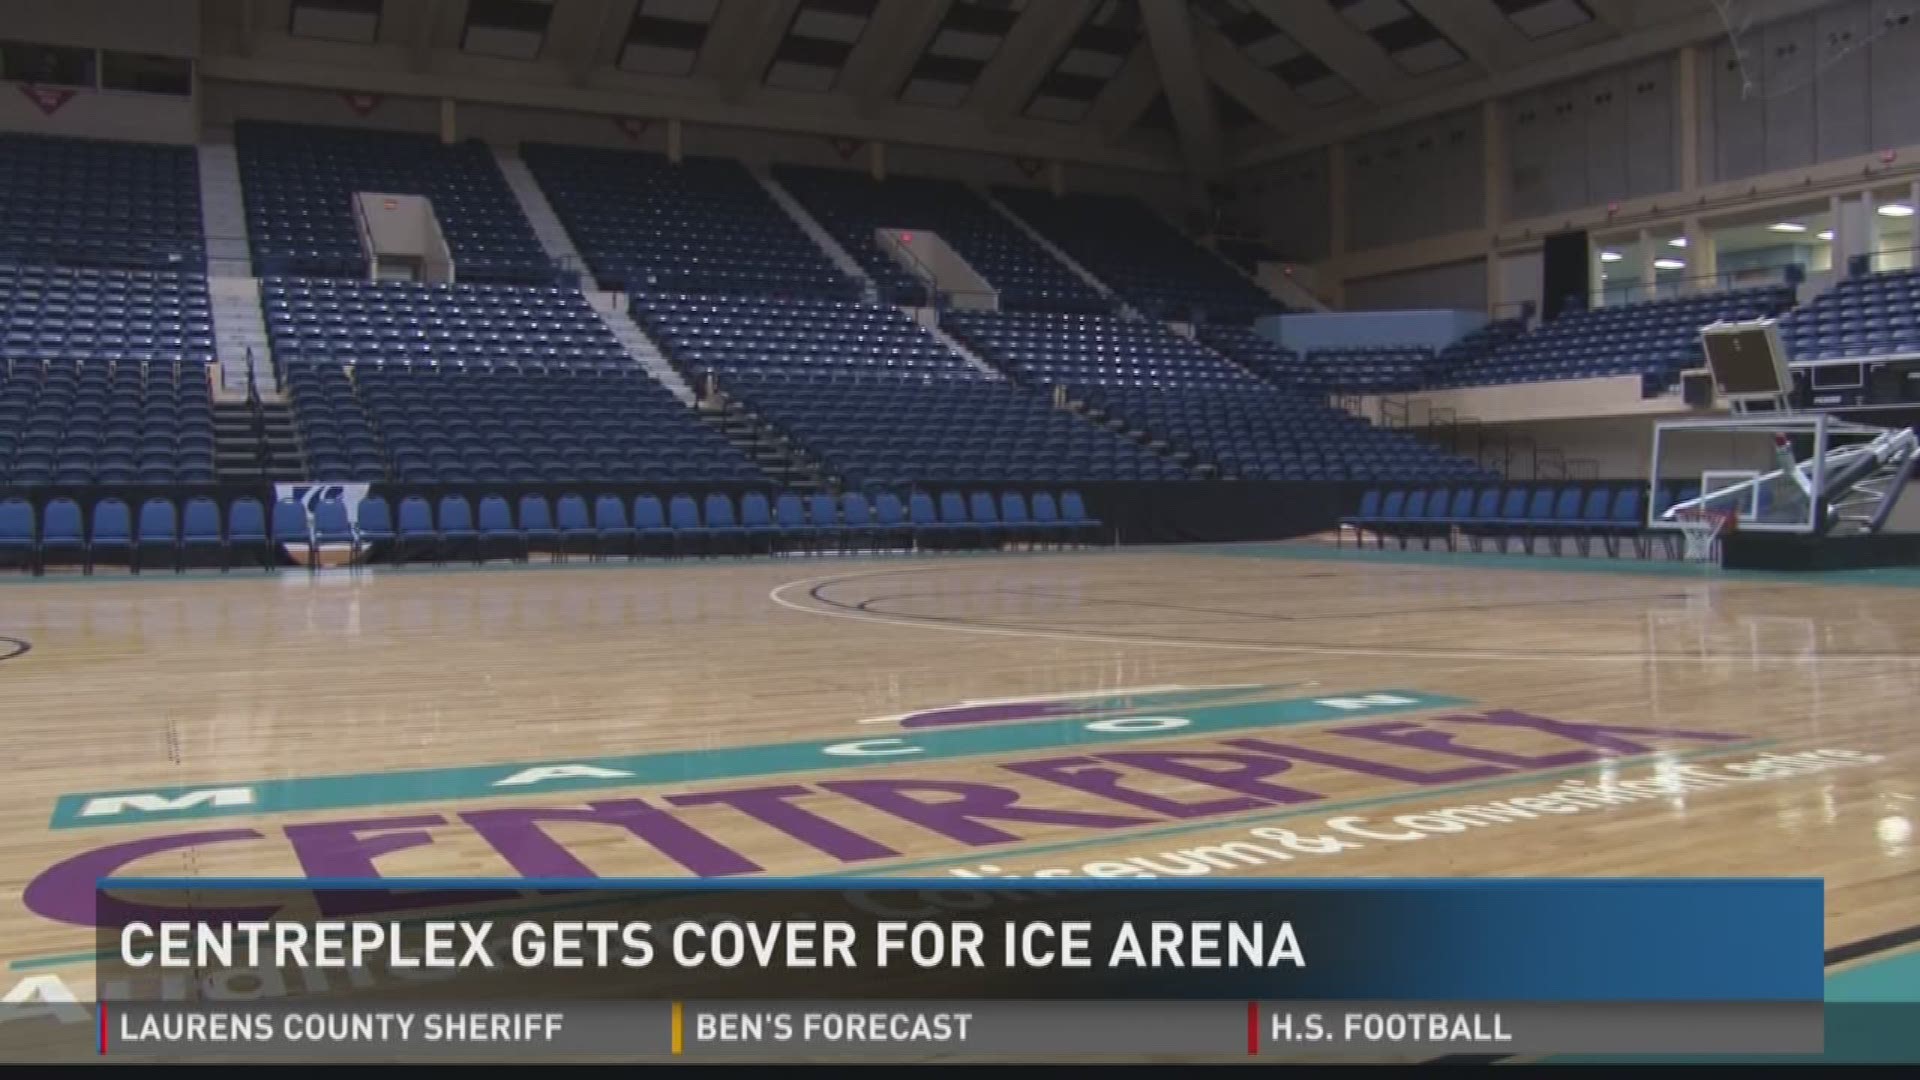 Centreplex gets cover for ice arena